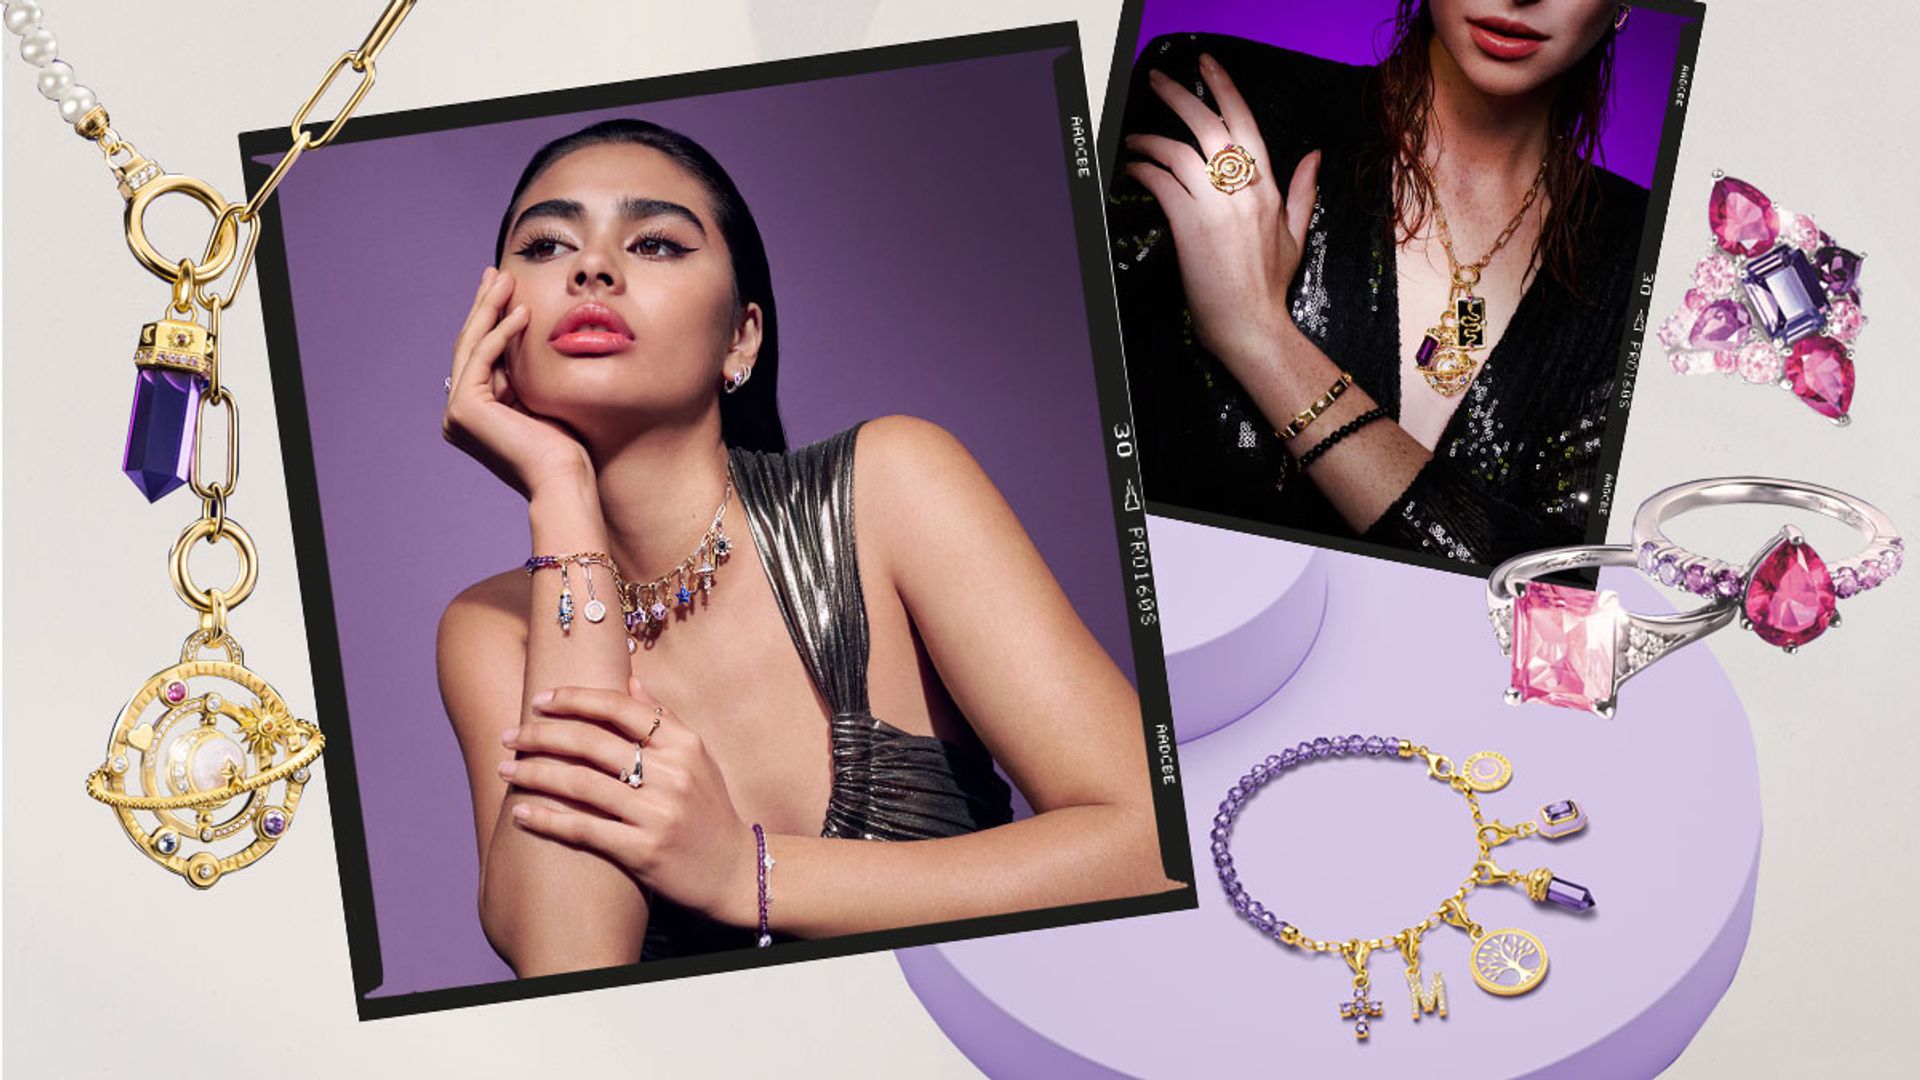 Celestial jewellery is trending – shop the new pieces from Thomas Sabo we’re dreaming of